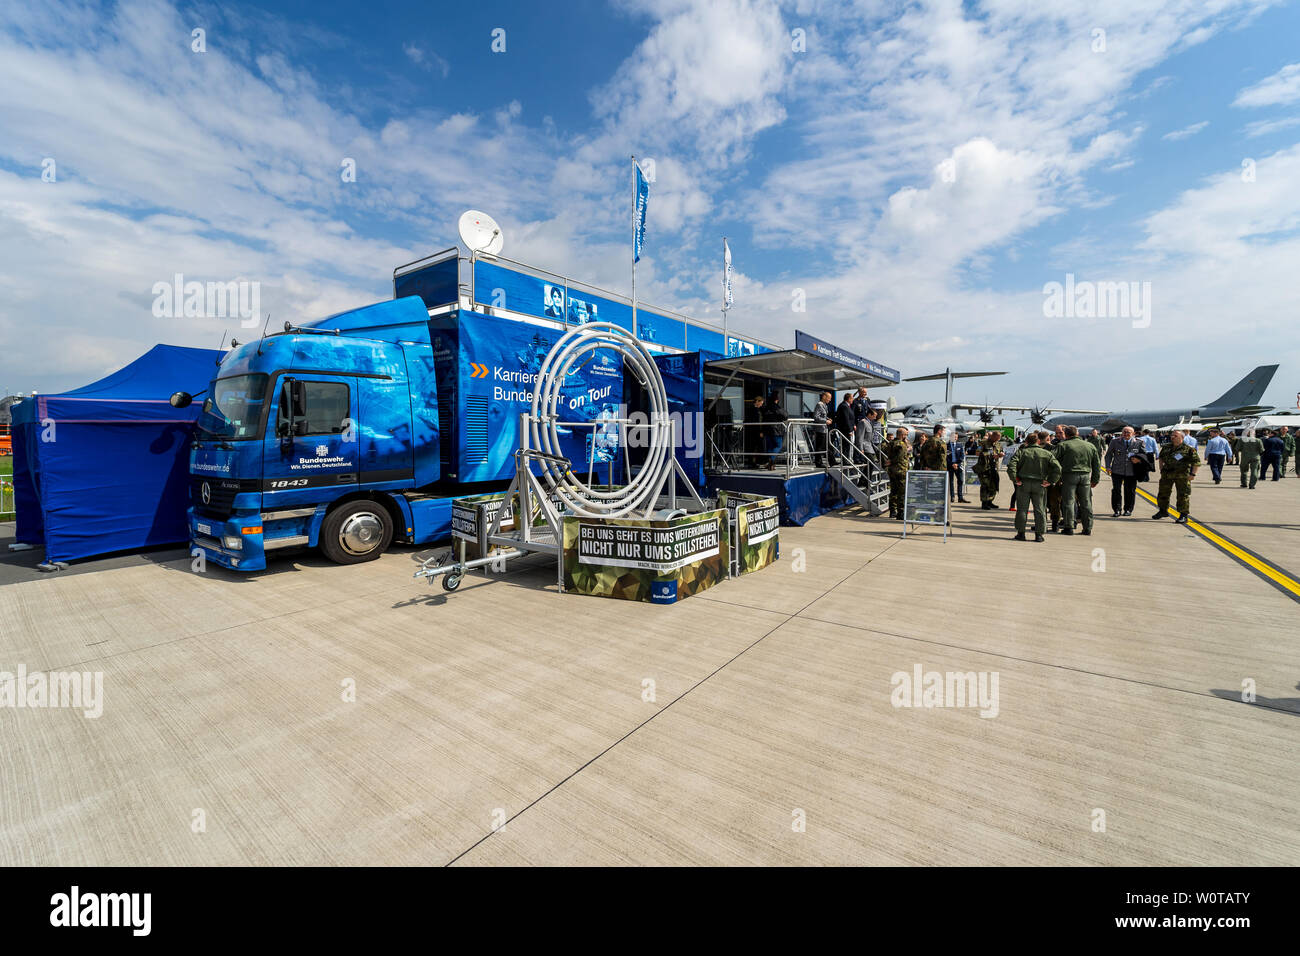 BERLIN, GERMANY - APRIL 25, 2018: Mobile (road train) recruitment point and career center for the German Army (Bundeswehr). Exhibition ILA Berlin Air Show 2018. Stock Photo